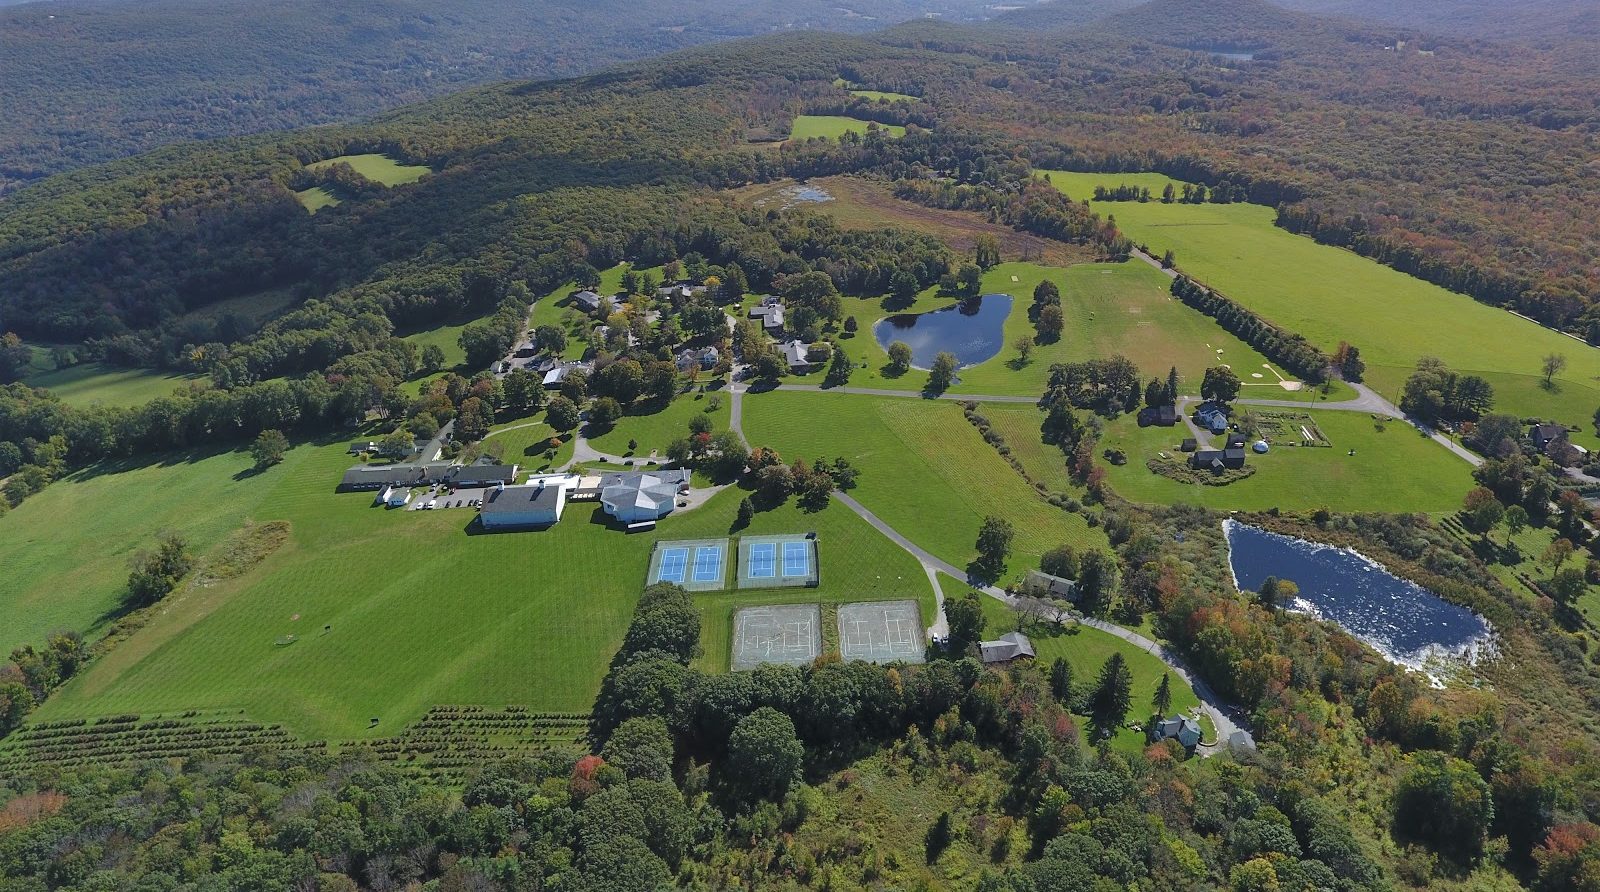 Aerial image of the Marvelwood School campus by Oliver Sanchez ’20.